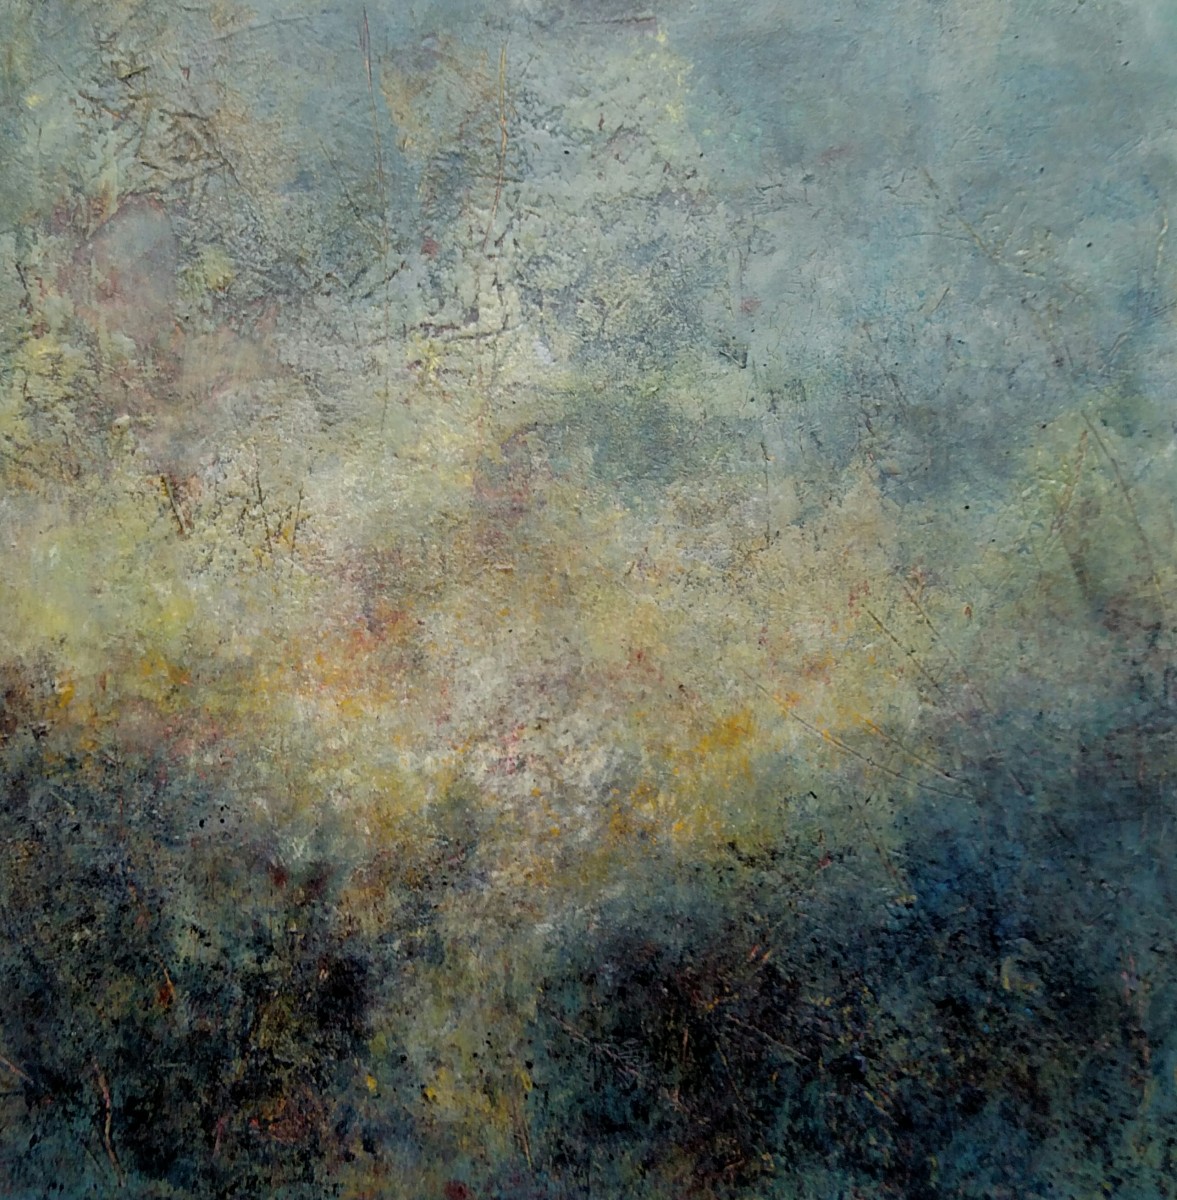 Apparition III, Out of the Mist by Mary Mendla 